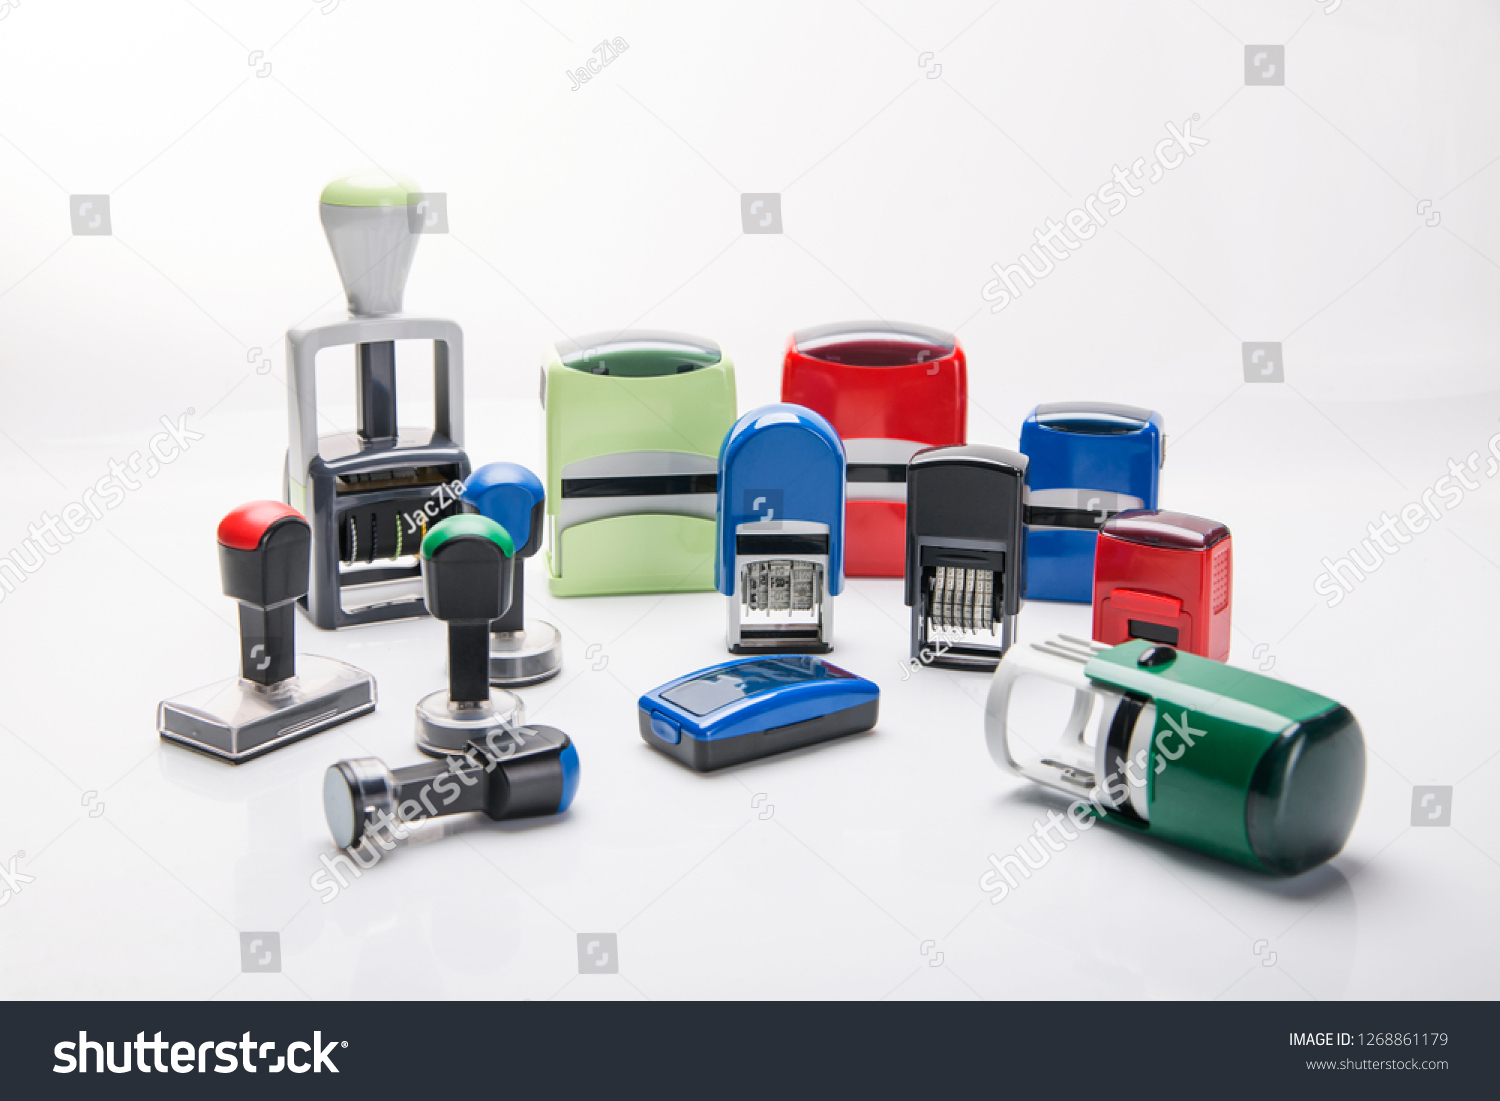 Office rubber stamp. Mechanism of a rubber stamp on a white background.  #1268861179